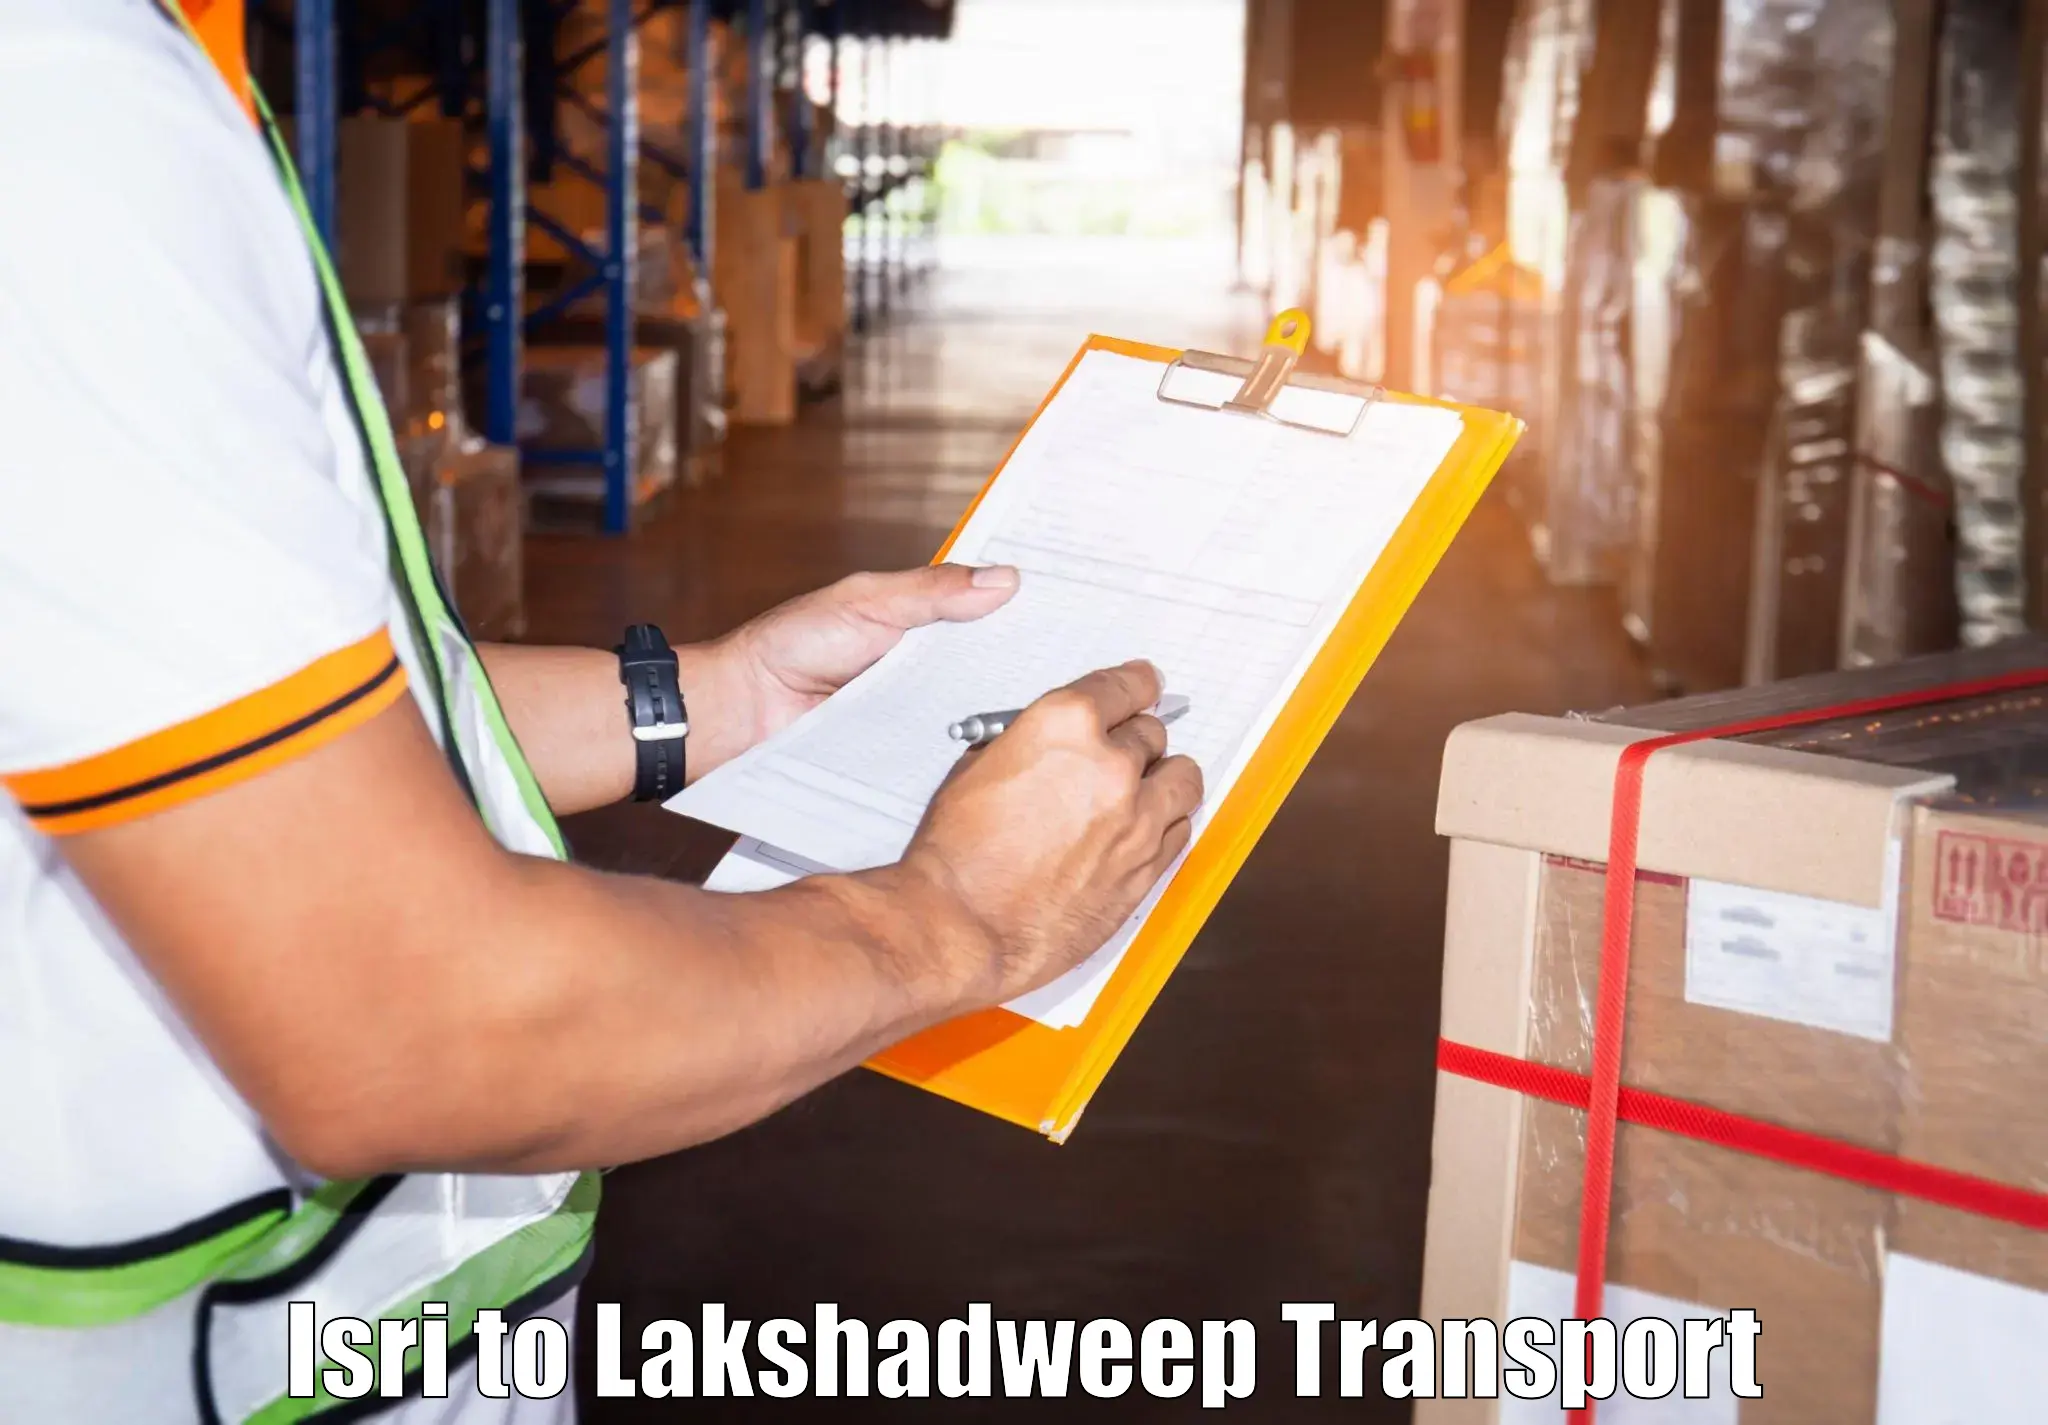 Two wheeler transport services Isri to Lakshadweep